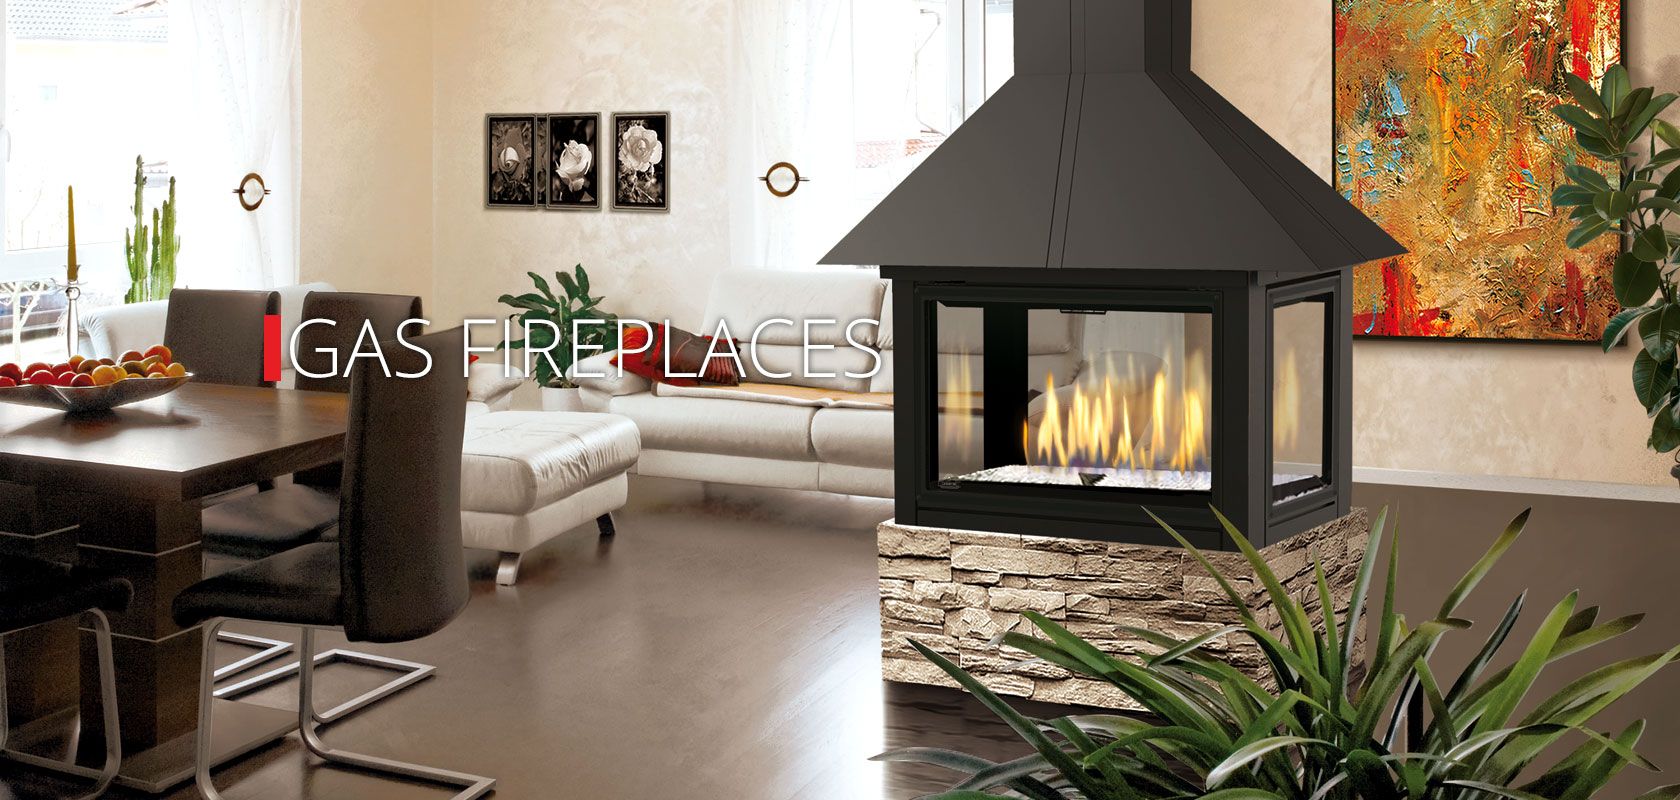 Gas Fireplace Manufacturers Luxury Gas Fireplaces J A Roby Inc Small House Plans